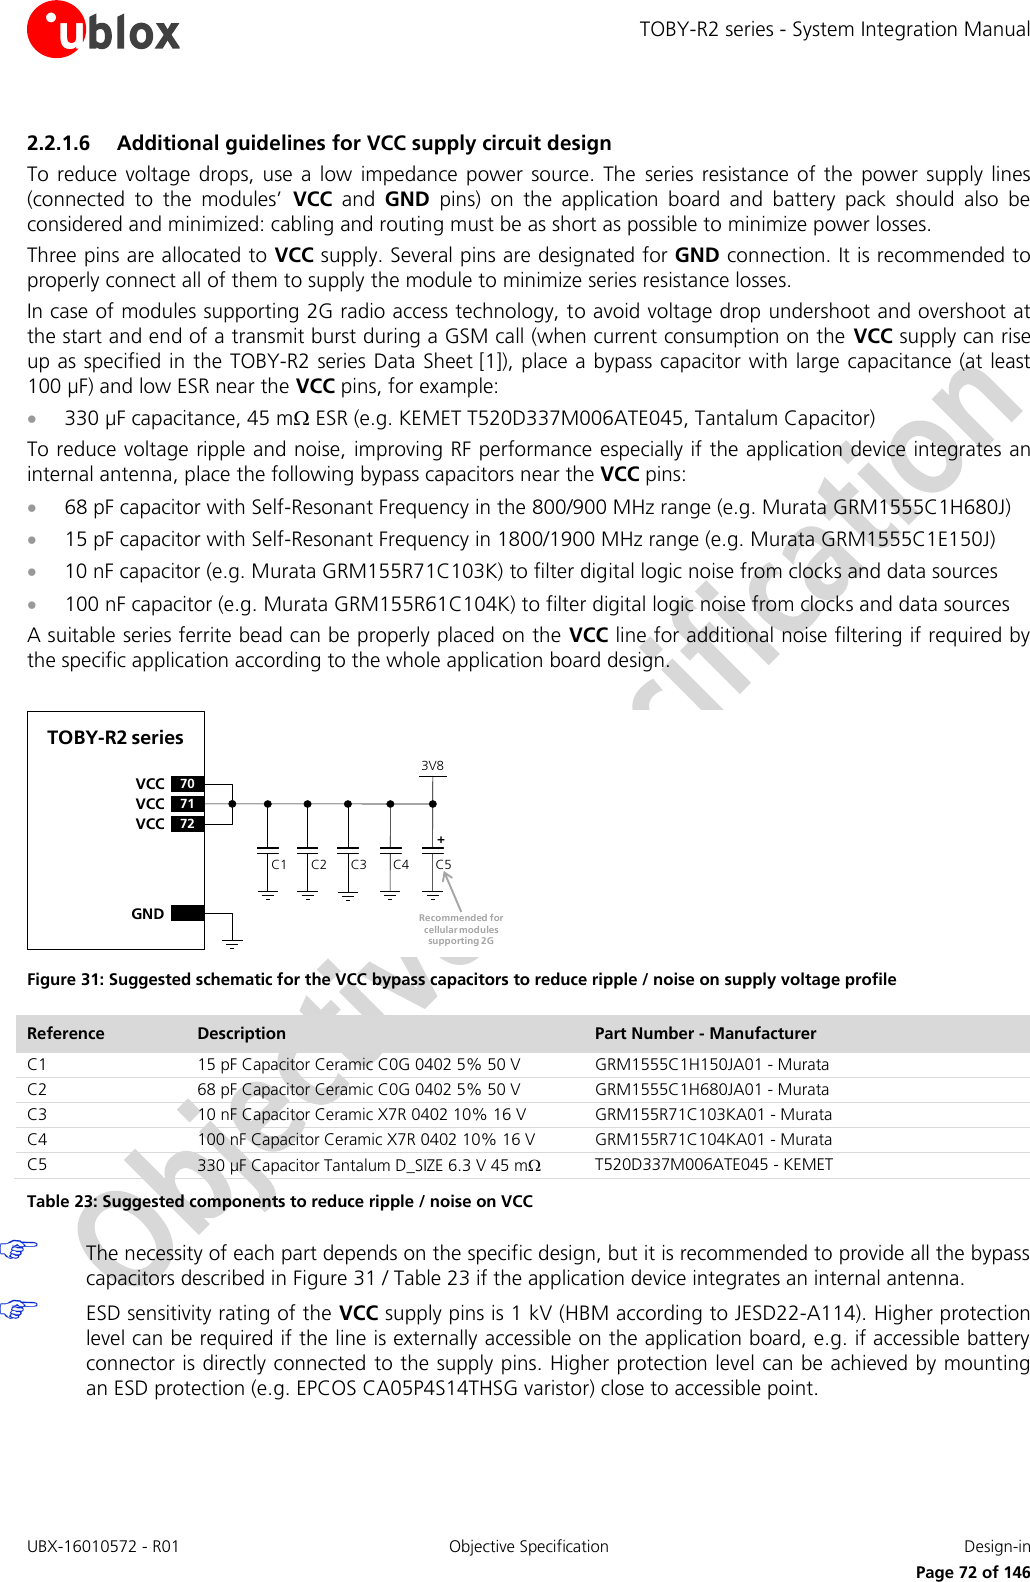 TOBY-R2 series - System Integration Manual UBX-16010572 - R01  Objective Specification  Design-in     Page 72 of 146 2.2.1.6 Additional guidelines for VCC supply circuit design To reduce  voltage  drops,  use  a  low  impedance  power  source. The  series  resistance  of the  power supply  lines (connected  to  the  modules’  VCC  and  GND  pins)  on  the  application  board  and  battery  pack  should  also  be considered and minimized: cabling and routing must be as short as possible to minimize power losses. Three pins are allocated to VCC supply. Several pins are designated for GND connection. It is recommended to properly connect all of them to supply the module to minimize series resistance losses. In case of modules supporting 2G radio access technology, to avoid voltage drop undershoot and overshoot at the start and end of a transmit burst during a GSM call (when current consumption on the  VCC supply can rise up as specified in the TOBY-R2 series Data Sheet [1]), place a bypass capacitor with large capacitance (at least 100 µF) and low ESR near the VCC pins, for example:  330 µF capacitance, 45 m ESR (e.g. KEMET T520D337M006ATE045, Tantalum Capacitor) To reduce voltage ripple and noise, improving RF performance especially if the application device integrates an internal antenna, place the following bypass capacitors near the VCC pins:  68 pF capacitor with Self-Resonant Frequency in the 800/900 MHz range (e.g. Murata GRM1555C1H680J)   15 pF capacitor with Self-Resonant Frequency in 1800/1900 MHz range (e.g. Murata GRM1555C1E150J)   10 nF capacitor (e.g. Murata GRM155R71C103K) to filter digital logic noise from clocks and data sources  100 nF capacitor (e.g. Murata GRM155R61C104K) to filter digital logic noise from clocks and data sources A suitable series ferrite bead can be properly placed on the VCC line for additional noise filtering if required by the specific application according to the whole application board design.  C2GNDC3 C4TOBY-R2 series71VCC72VCC70VCCC1 C53V8+Recommended for cellular modules supporting 2G Figure 31: Suggested schematic for the VCC bypass capacitors to reduce ripple / noise on supply voltage profile  Reference Description Part Number - Manufacturer C1 15 pF Capacitor Ceramic C0G 0402 5% 50 V GRM1555C1H150JA01 - Murata C2 68 pF Capacitor Ceramic C0G 0402 5% 50 V GRM1555C1H680JA01 - Murata C3 10 nF Capacitor Ceramic X7R 0402 10% 16 V GRM155R71C103KA01 - Murata C4 100 nF Capacitor Ceramic X7R 0402 10% 16 V GRM155R71C104KA01 - Murata C5 330 µF Capacitor Tantalum D_SIZE 6.3 V 45 m T520D337M006ATE045 - KEMET Table 23: Suggested components to reduce ripple / noise on VCC   The necessity of each part depends on the specific design, but it is recommended to provide all the bypass capacitors described in Figure 31 / Table 23 if the application device integrates an internal antenna.  ESD sensitivity rating of the VCC supply pins is 1 kV (HBM according to JESD22-A114). Higher protection level can be required if the line is externally accessible on the application board, e.g. if accessible battery connector is directly connected to the supply pins. Higher protection level can be achieved by mounting an ESD protection (e.g. EPCOS CA05P4S14THSG varistor) close to accessible point.  